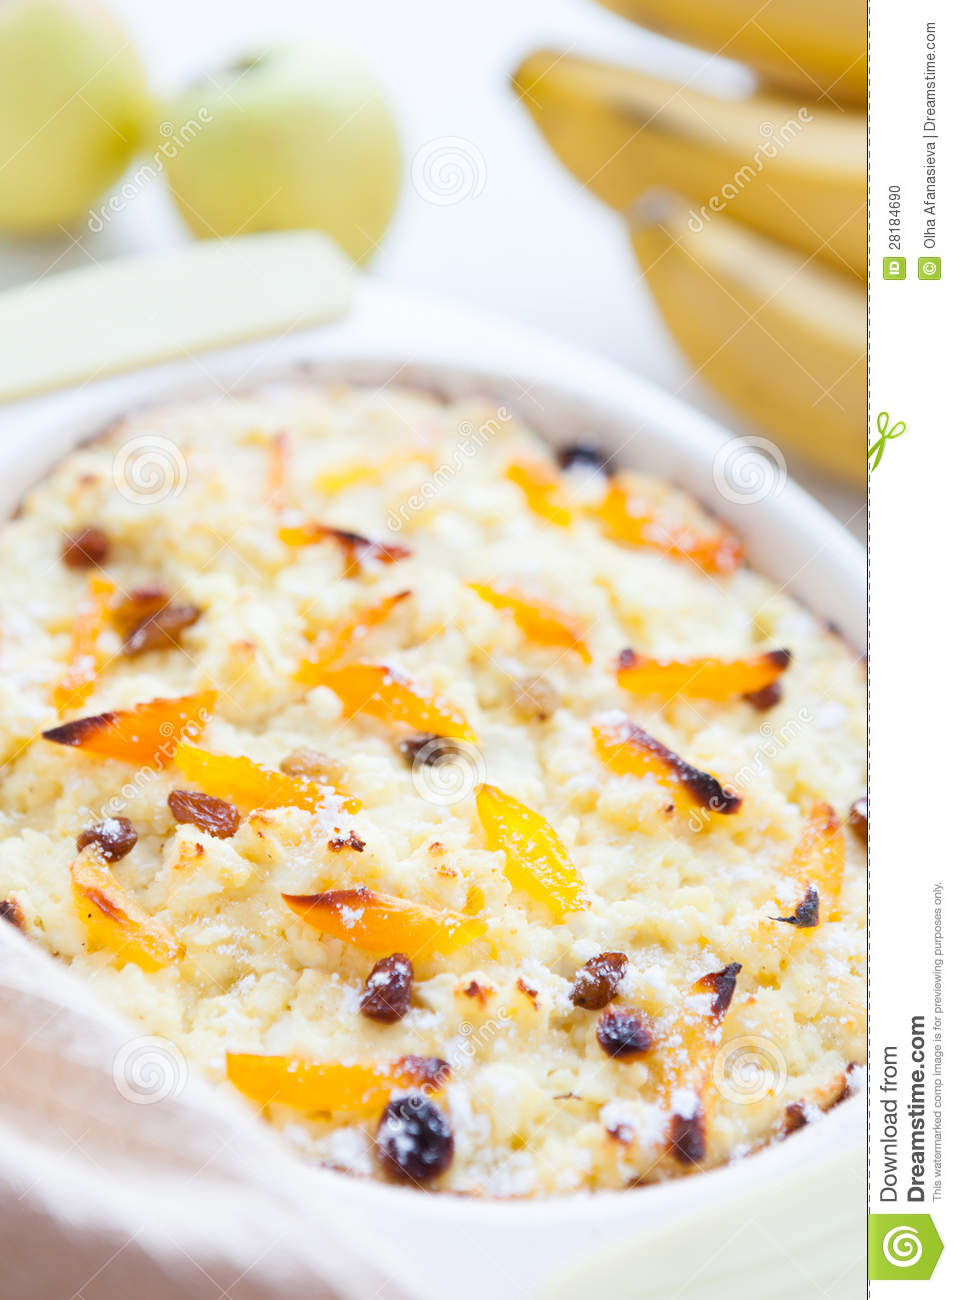 Curd Pudding With Banana And Dried Fruit Stock Photo   Image  28184690